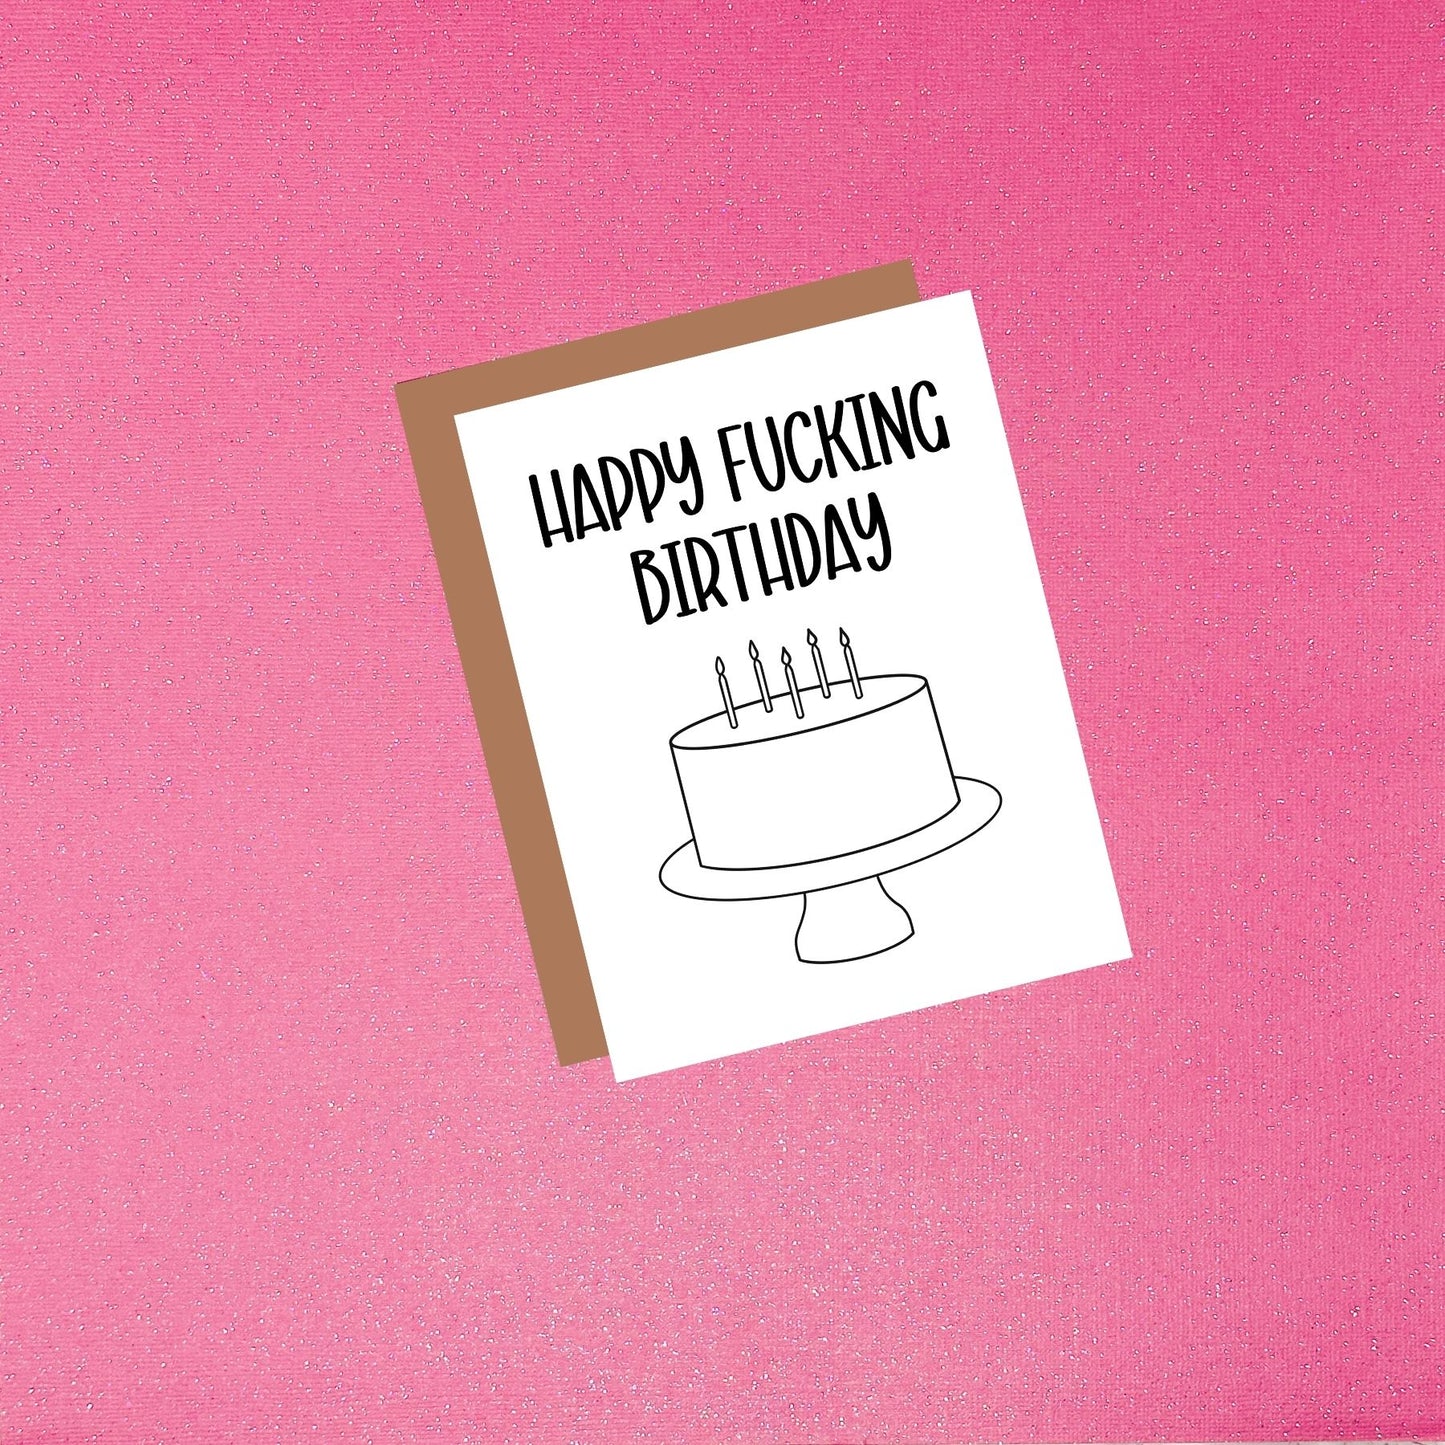 Adult Coloring Card - Happy Fucking Birthday